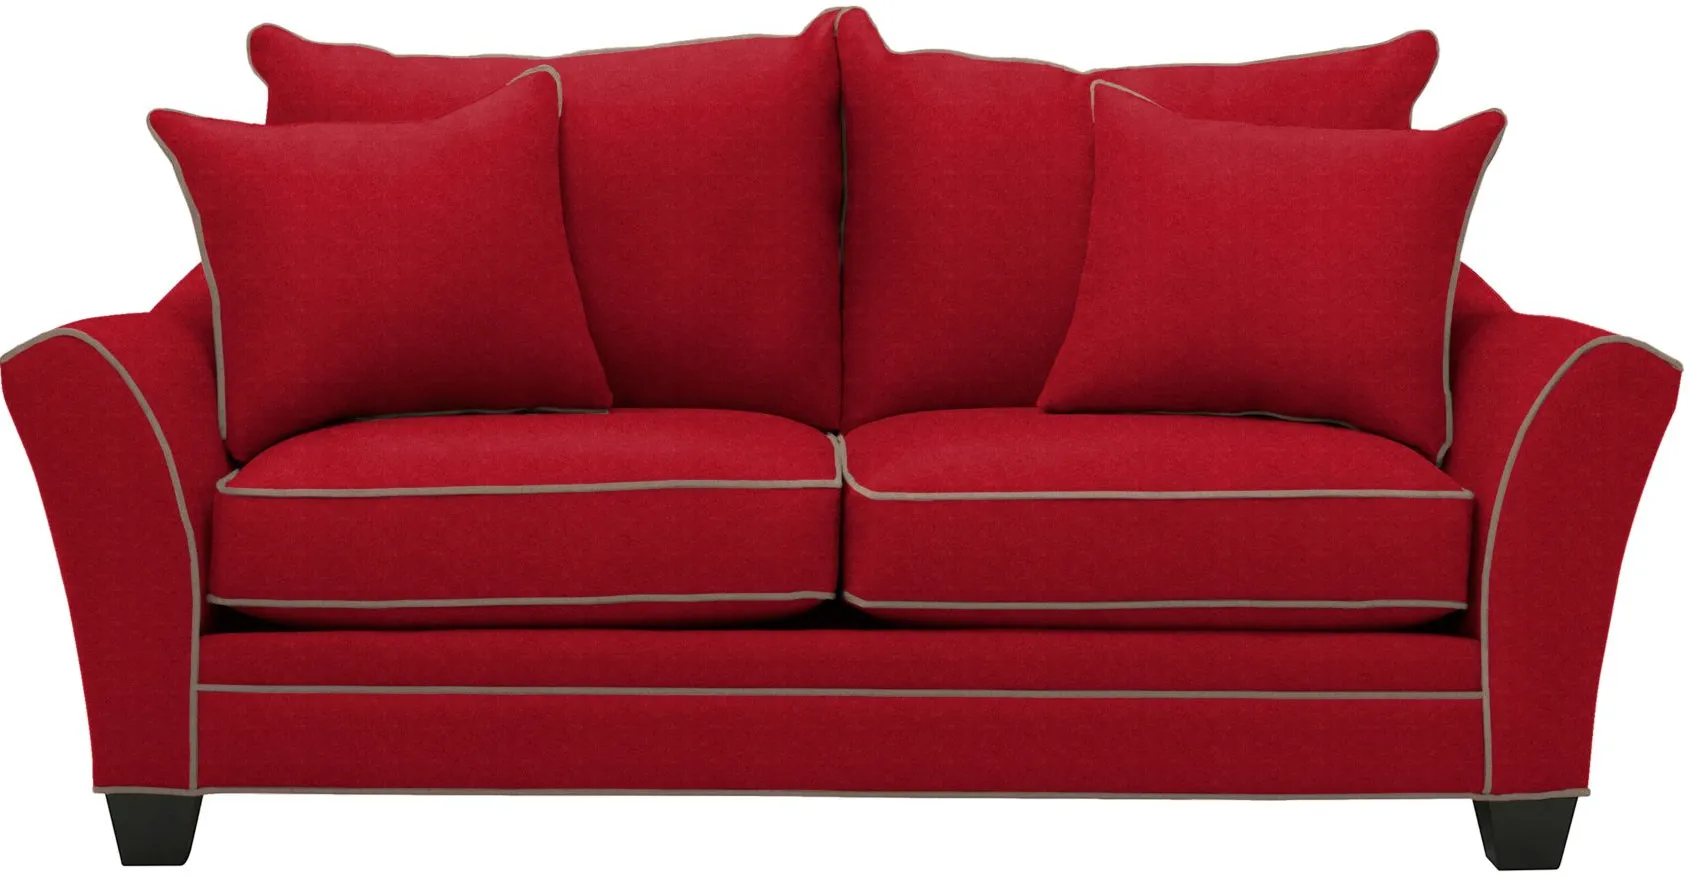 Briarwood Apartment Sleeper Sofa in Suede So Soft Cardinal/Mineral by H.M. Richards